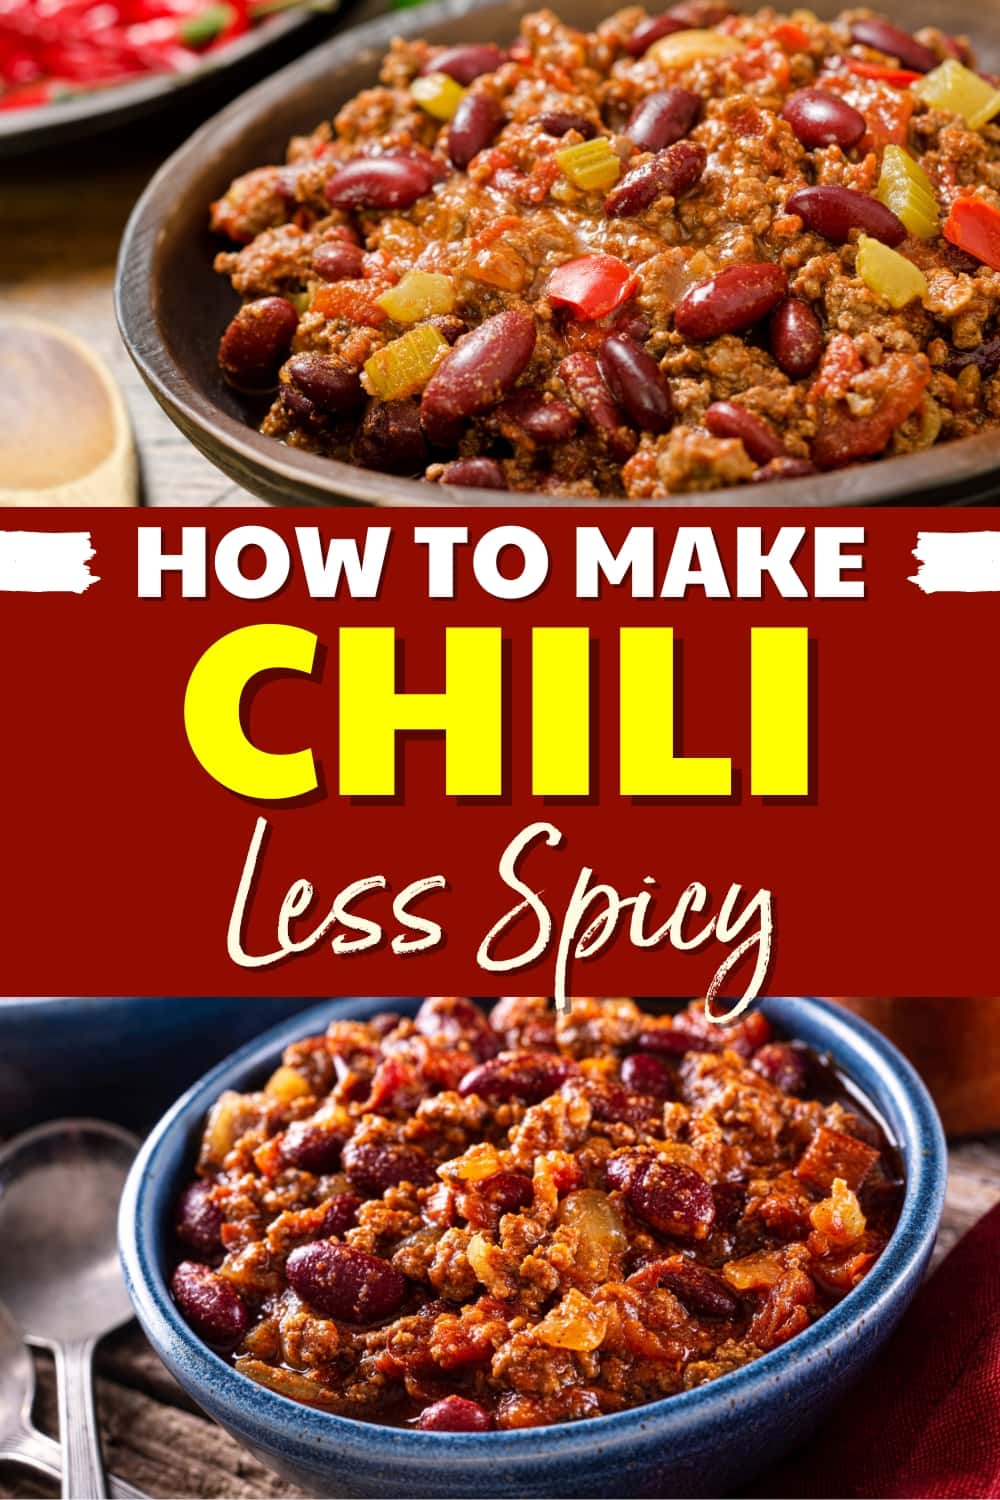 How to Make Chili Less Spicy (6 Easy Ways) - Insanely Good